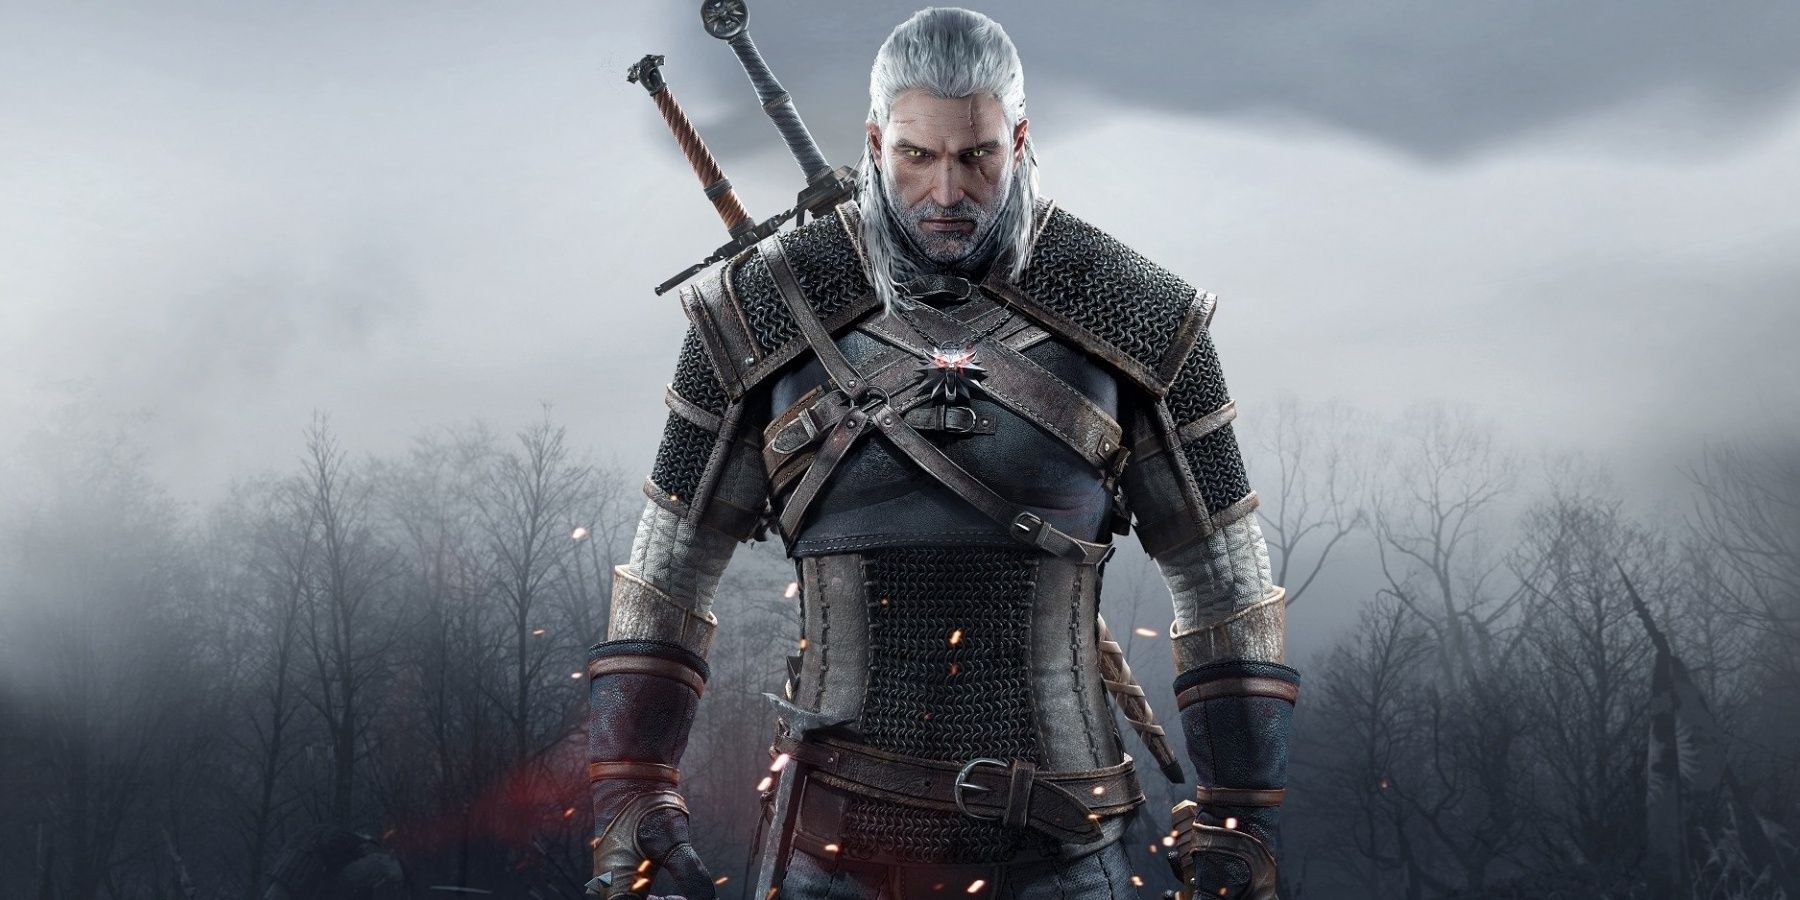 Geralt stands showing his armor, Witcher 3